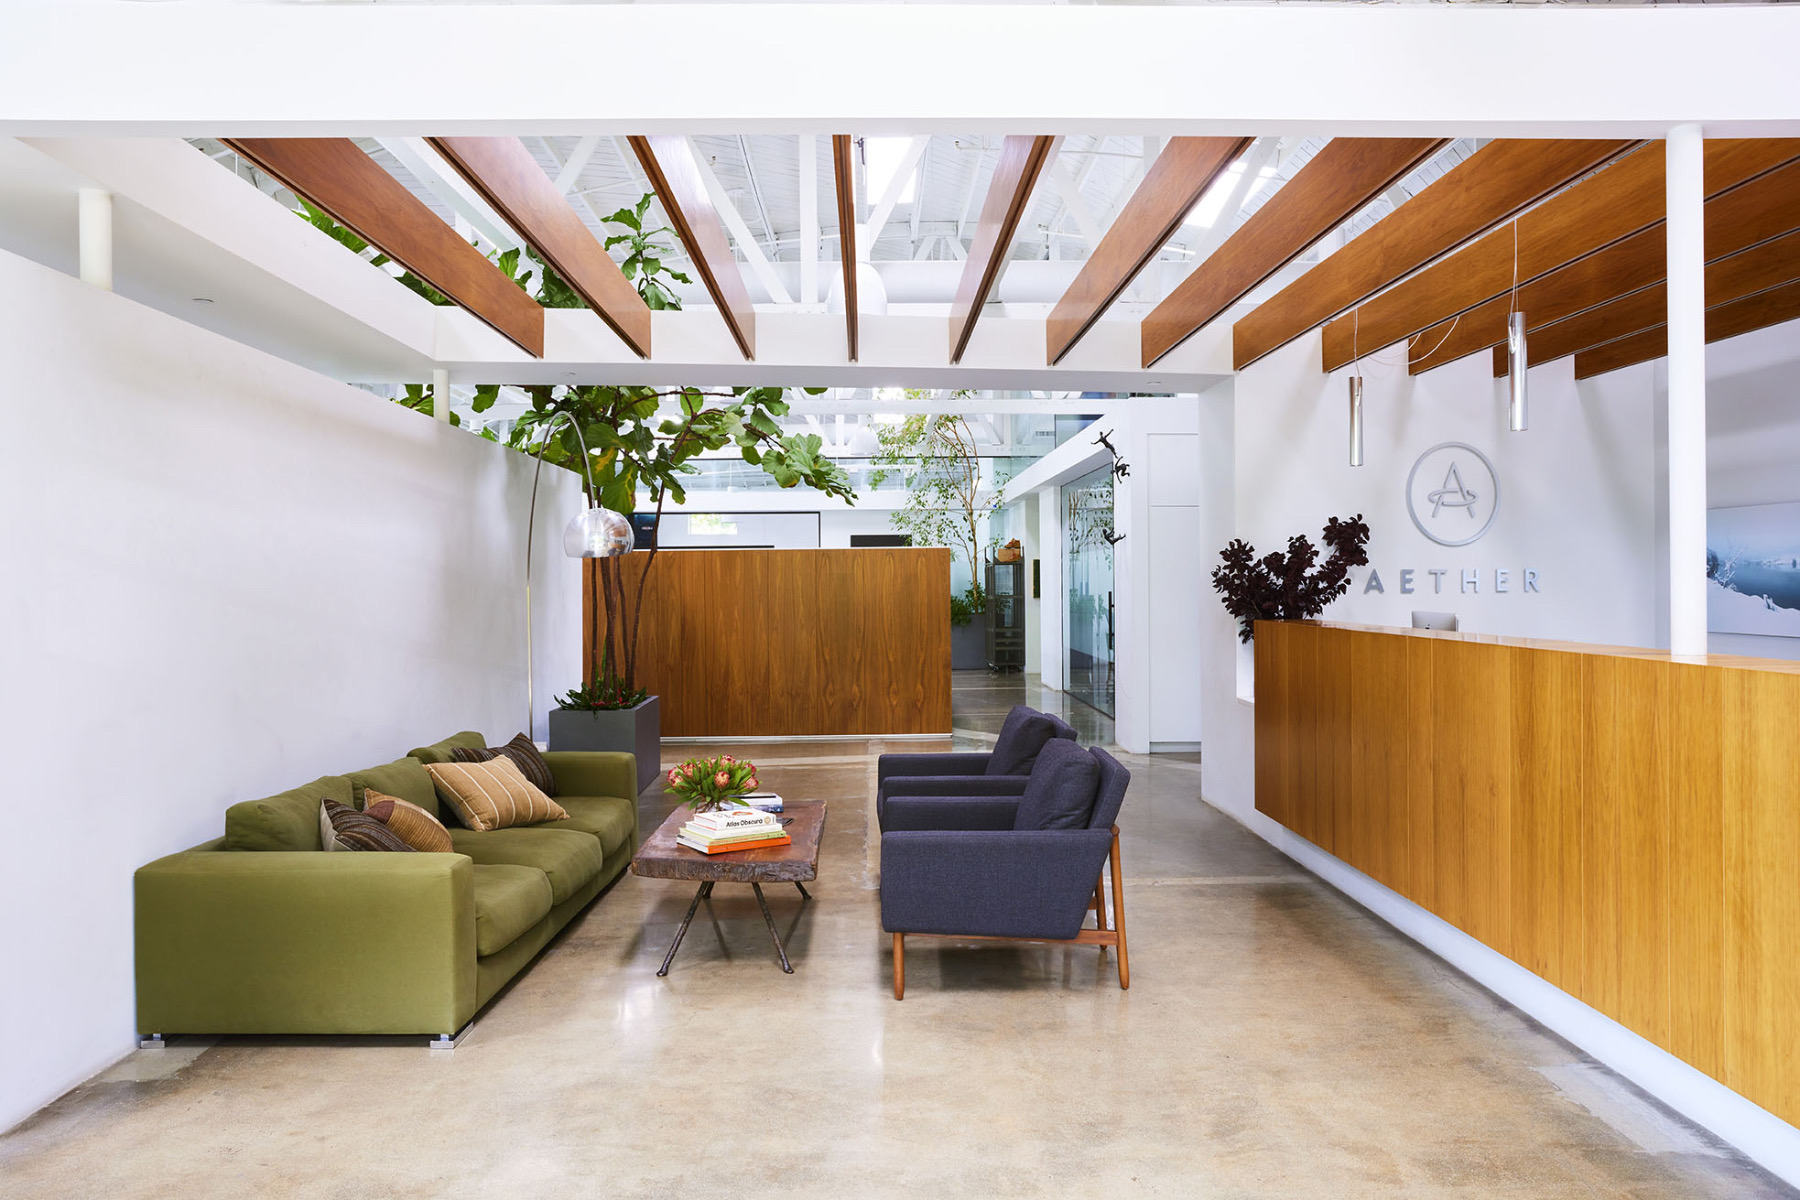 A Look Inside Aether Apparel’s New Los Angeles Office